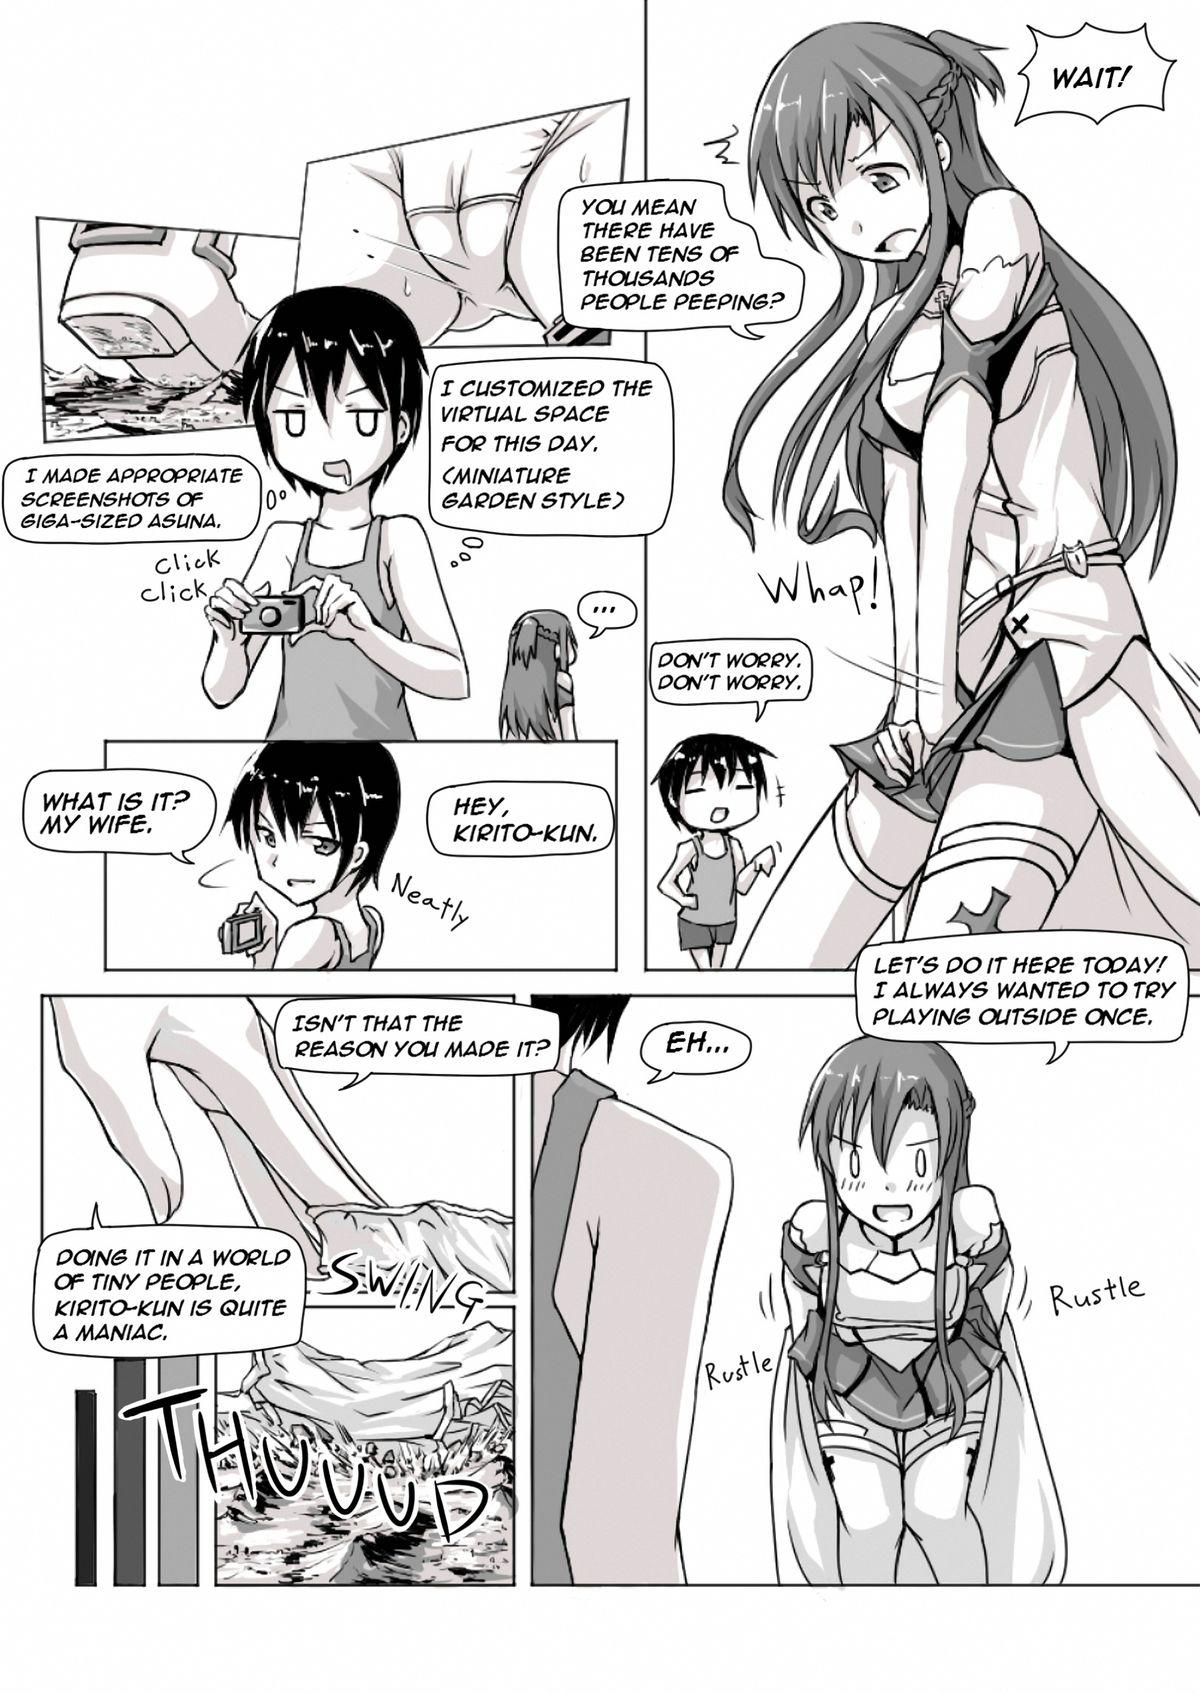 Size chaned Asuna wants to do Anything 2